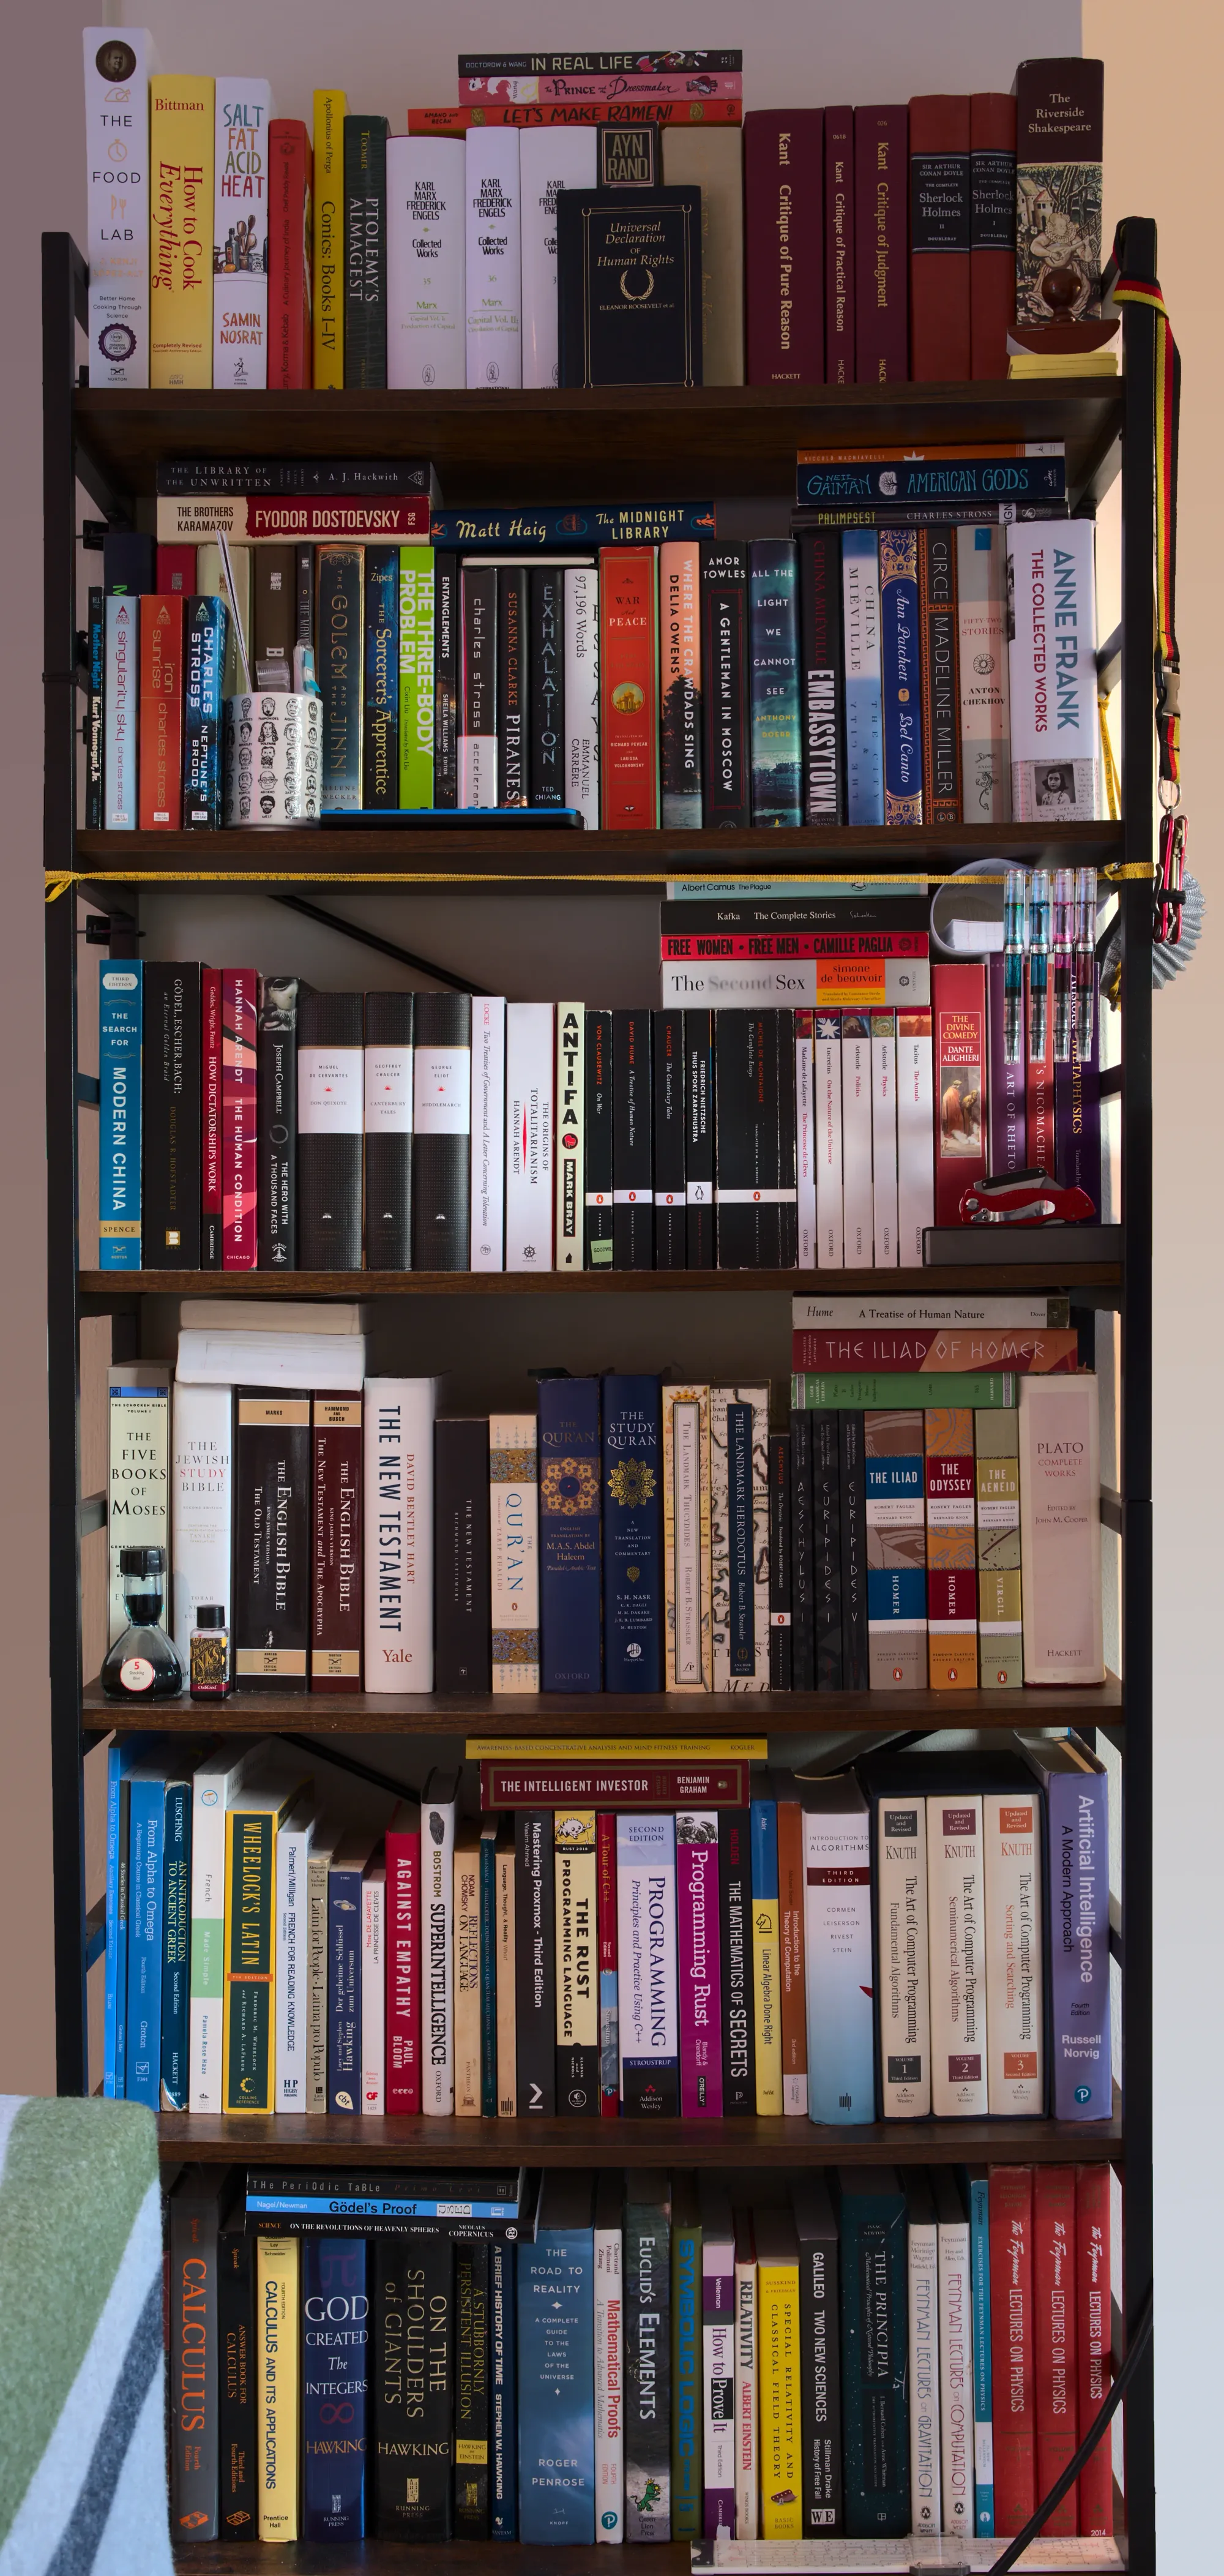 A photo of my bookshelf. There are 6 levels, all filled with books of many genres.